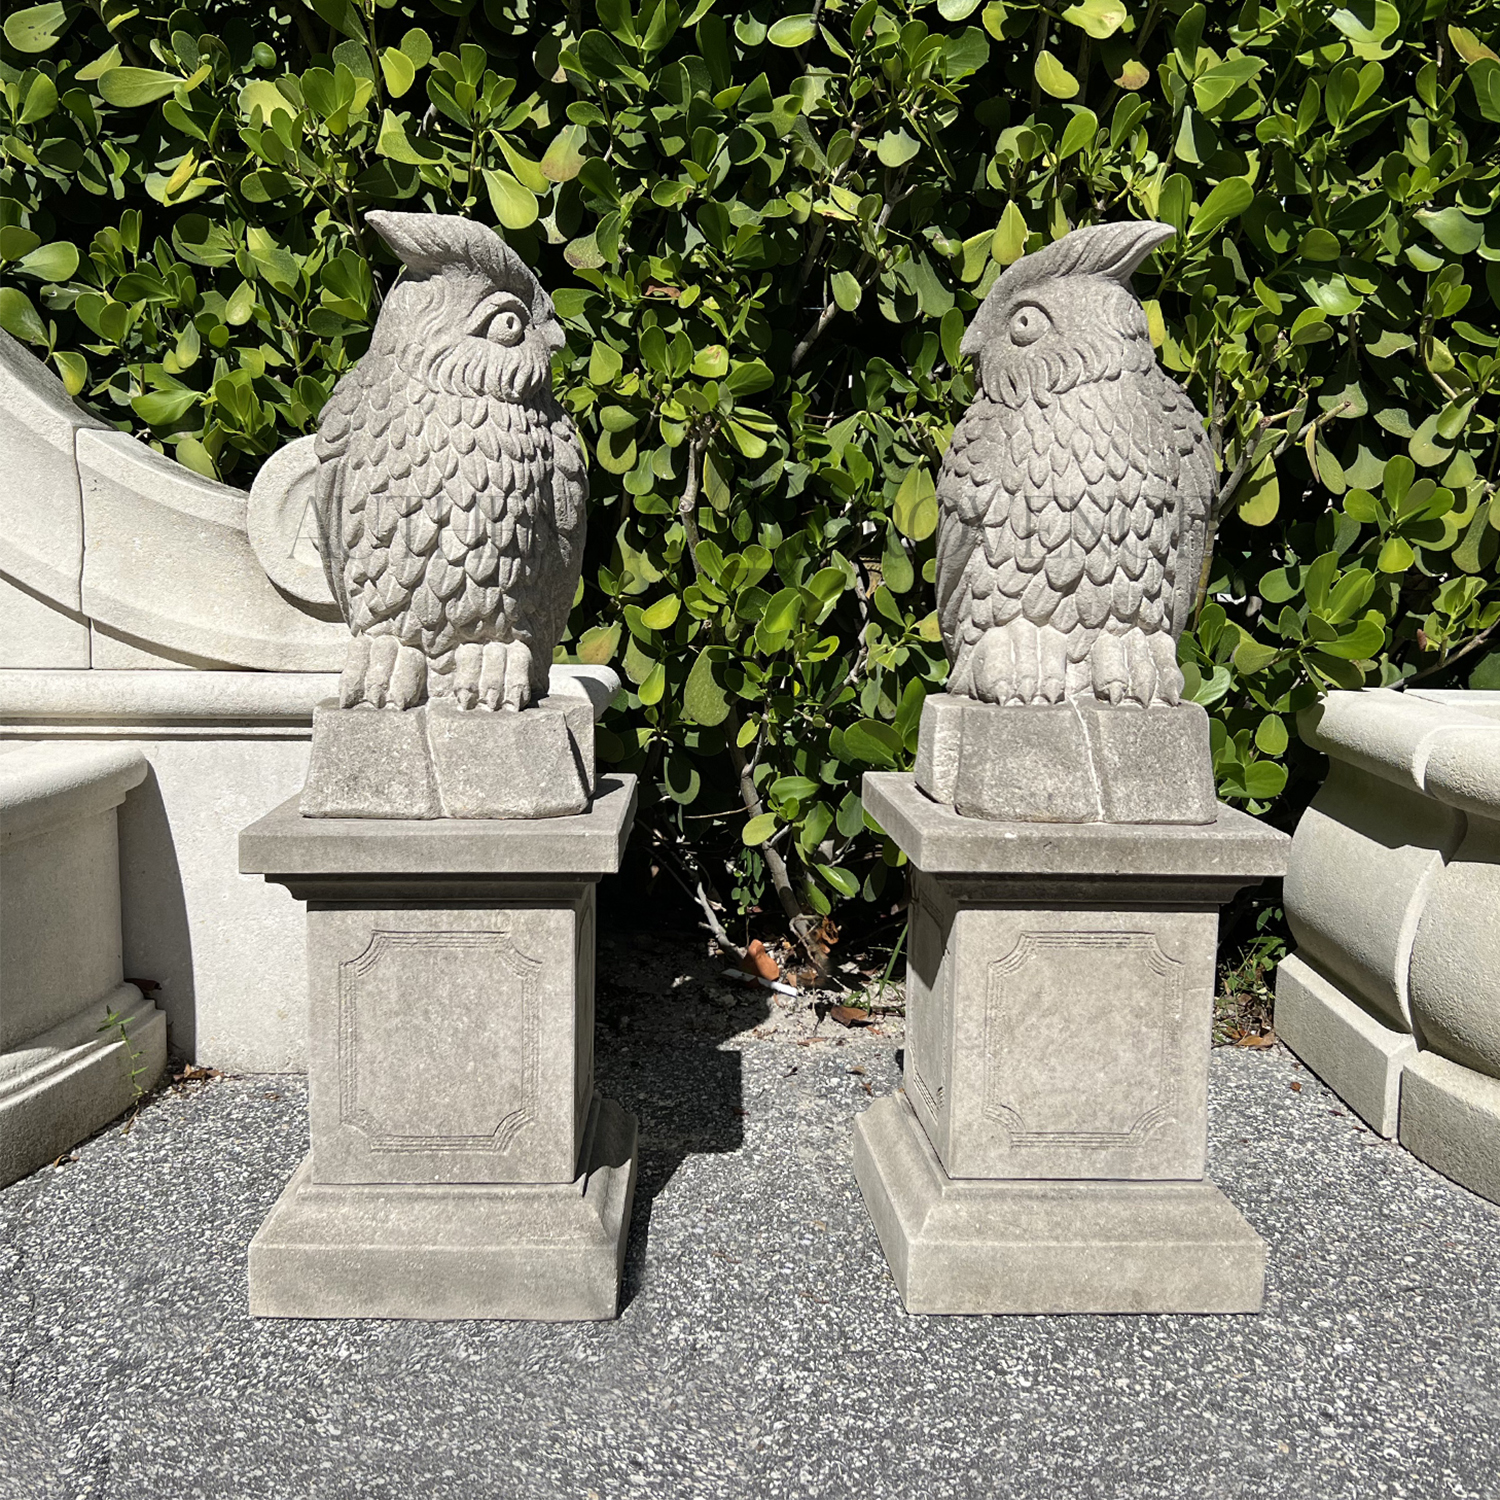 Pair of Owl Statues